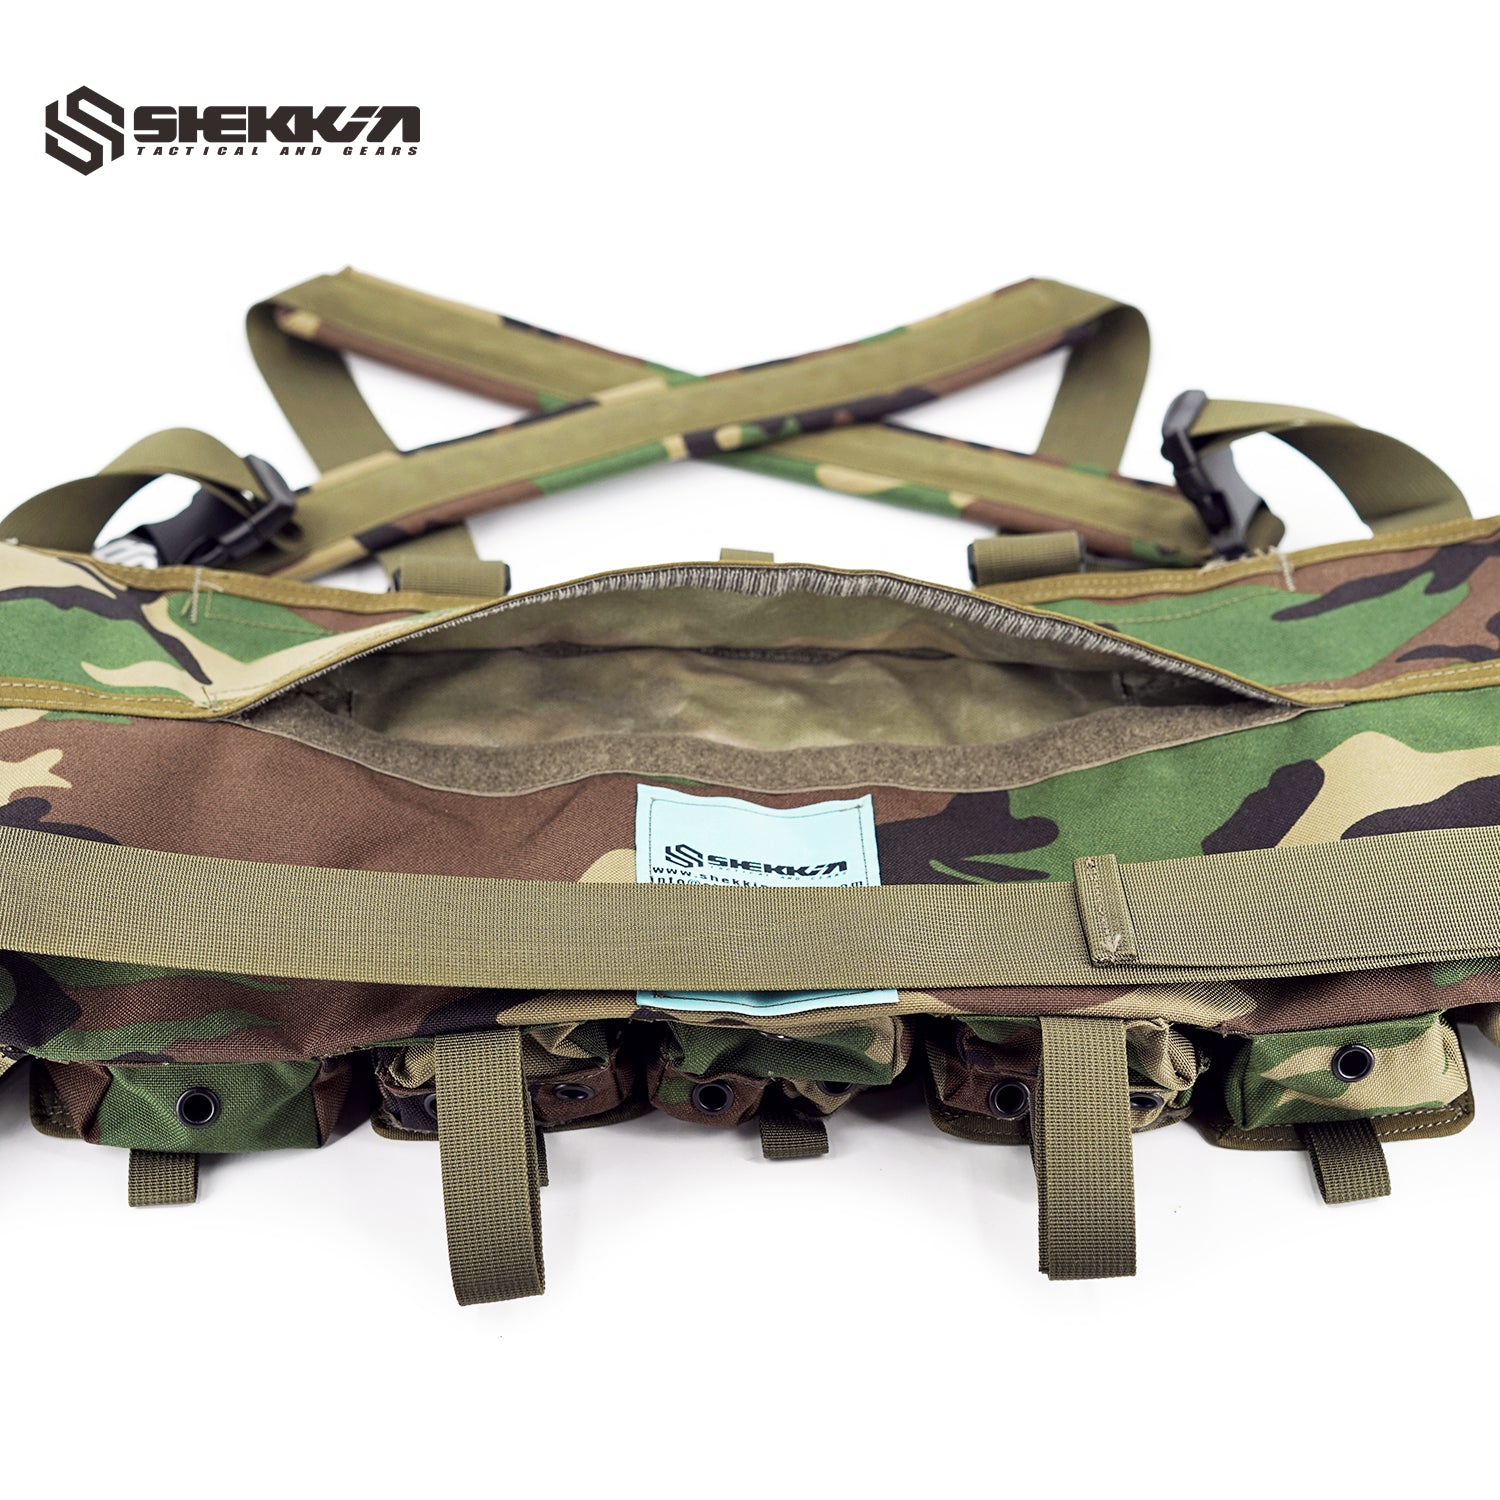 Delta force SF Tactic Chest Rig - Shekkin Gears